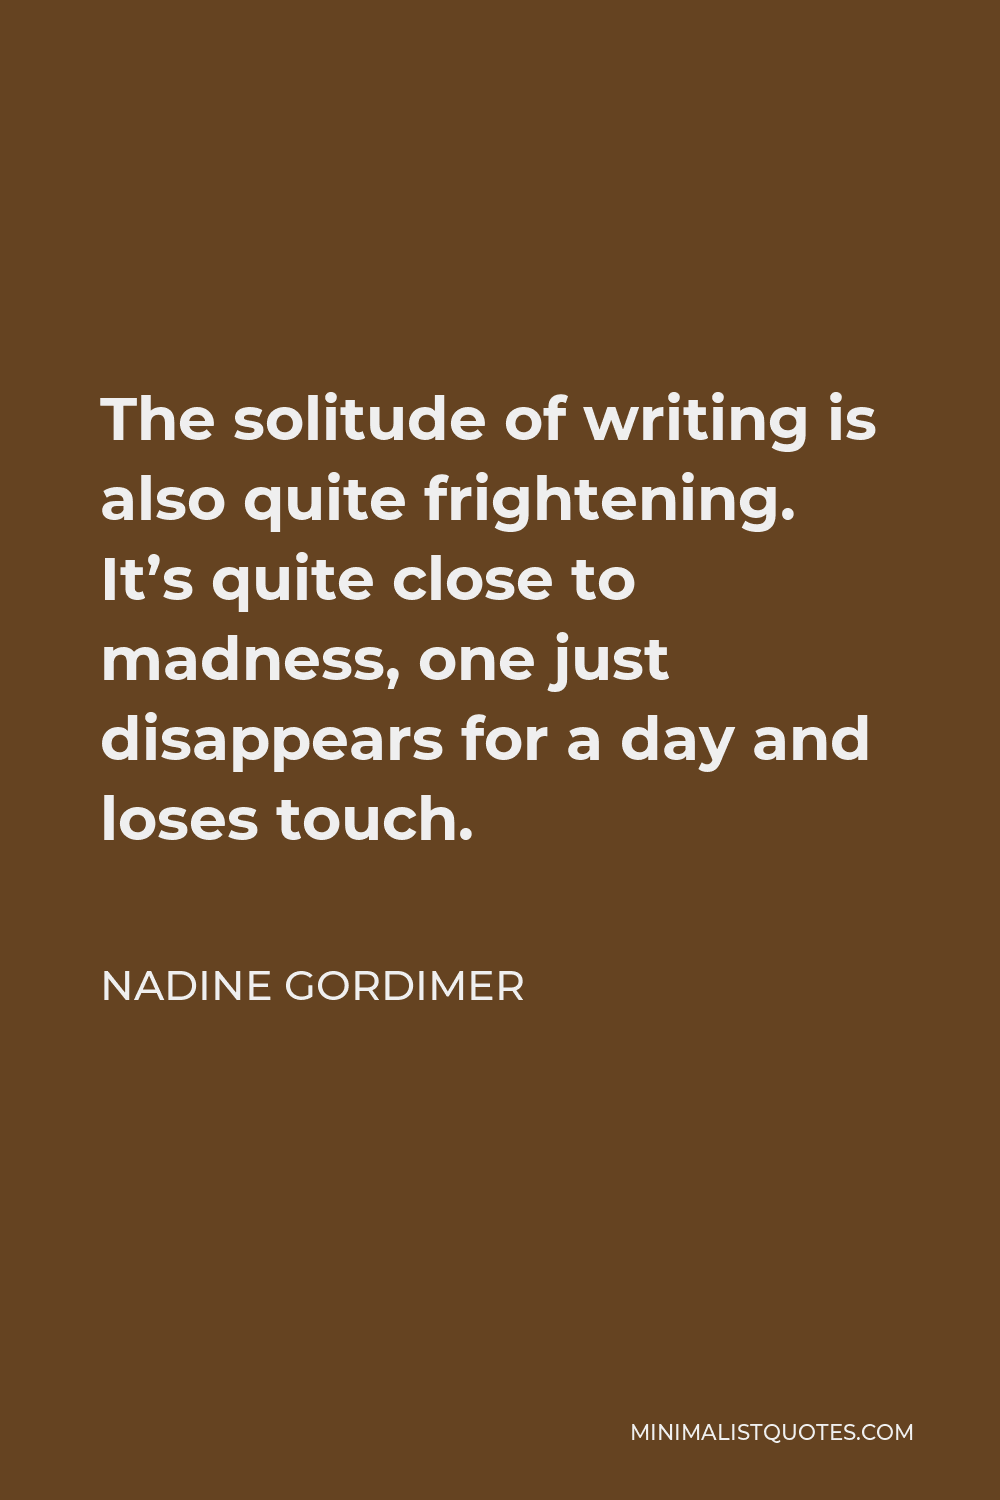 Nadine Gordimer Quote - The solitude of writing is also quite frightening. It’s quite close to madness, one just disappears for a day and loses touch.